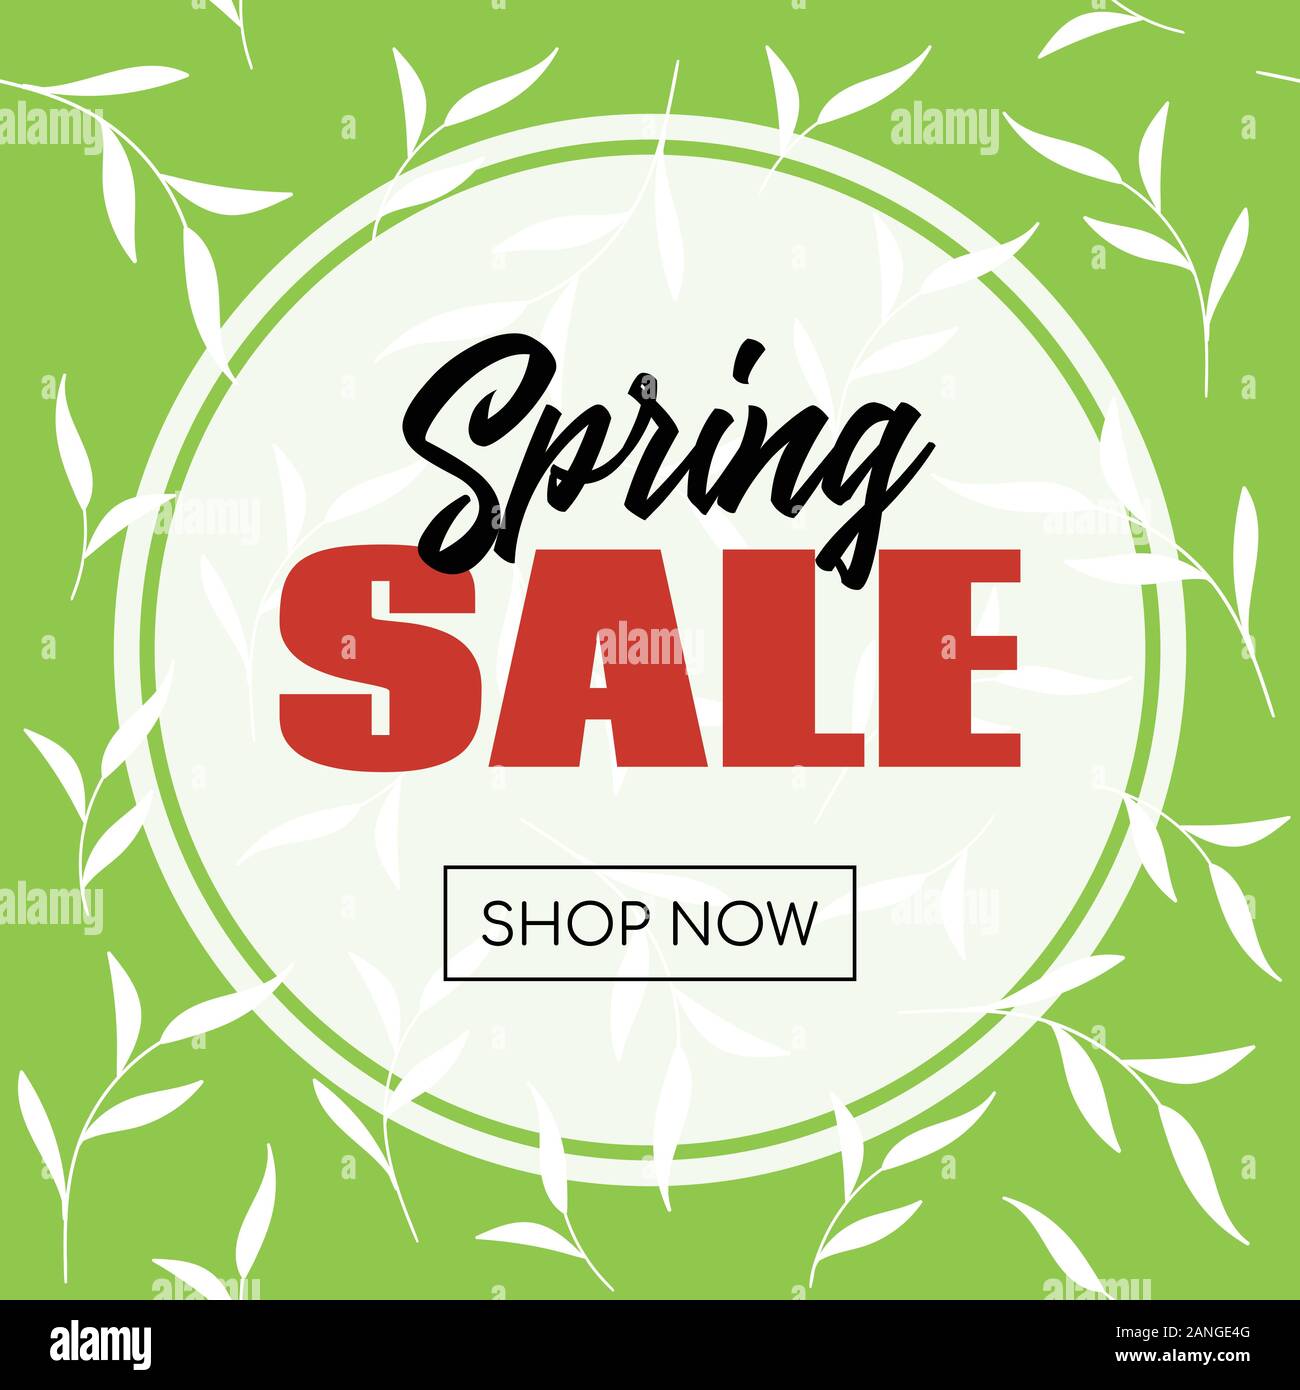 Spring sale banner. Template for online store Stock Vector